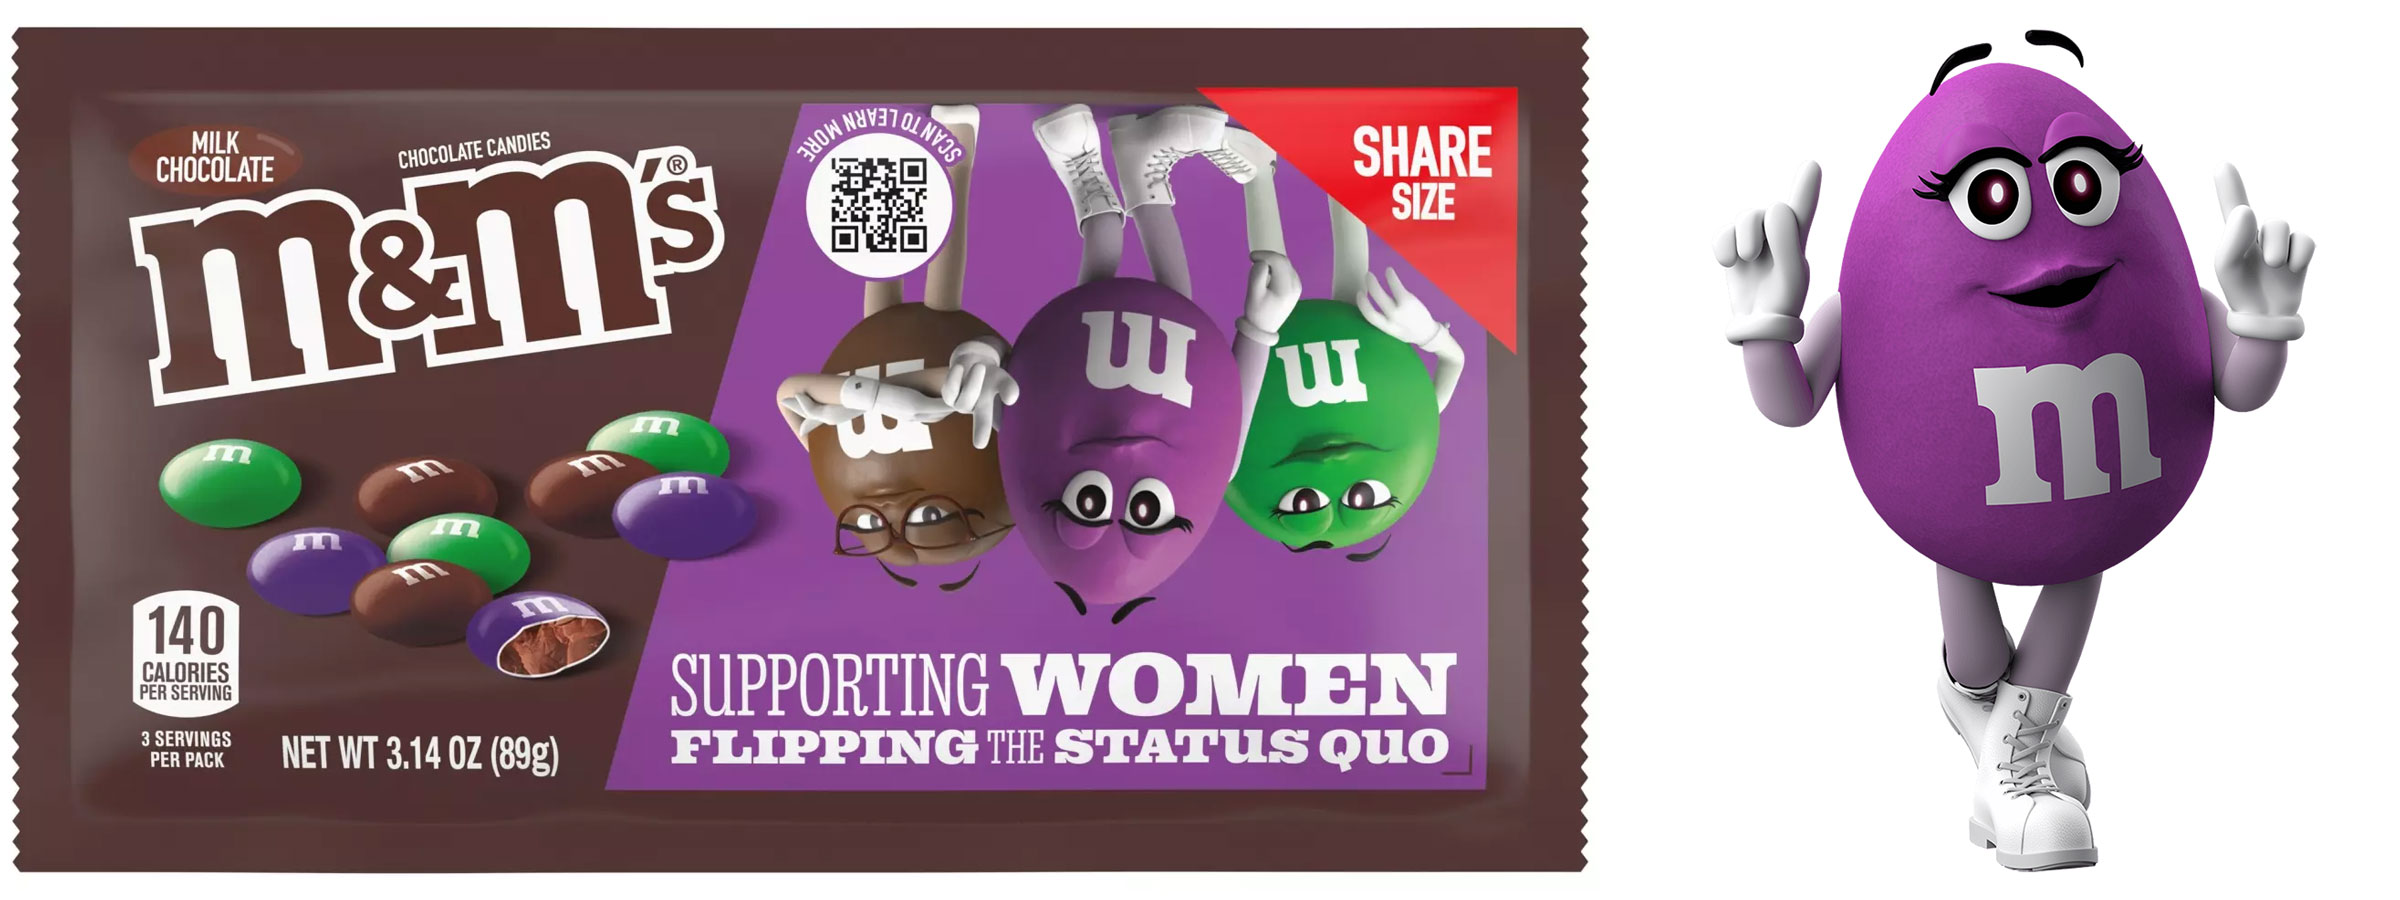 M&M’s bag reading “supporting women / flipping the status quo” and purple M&M’s character